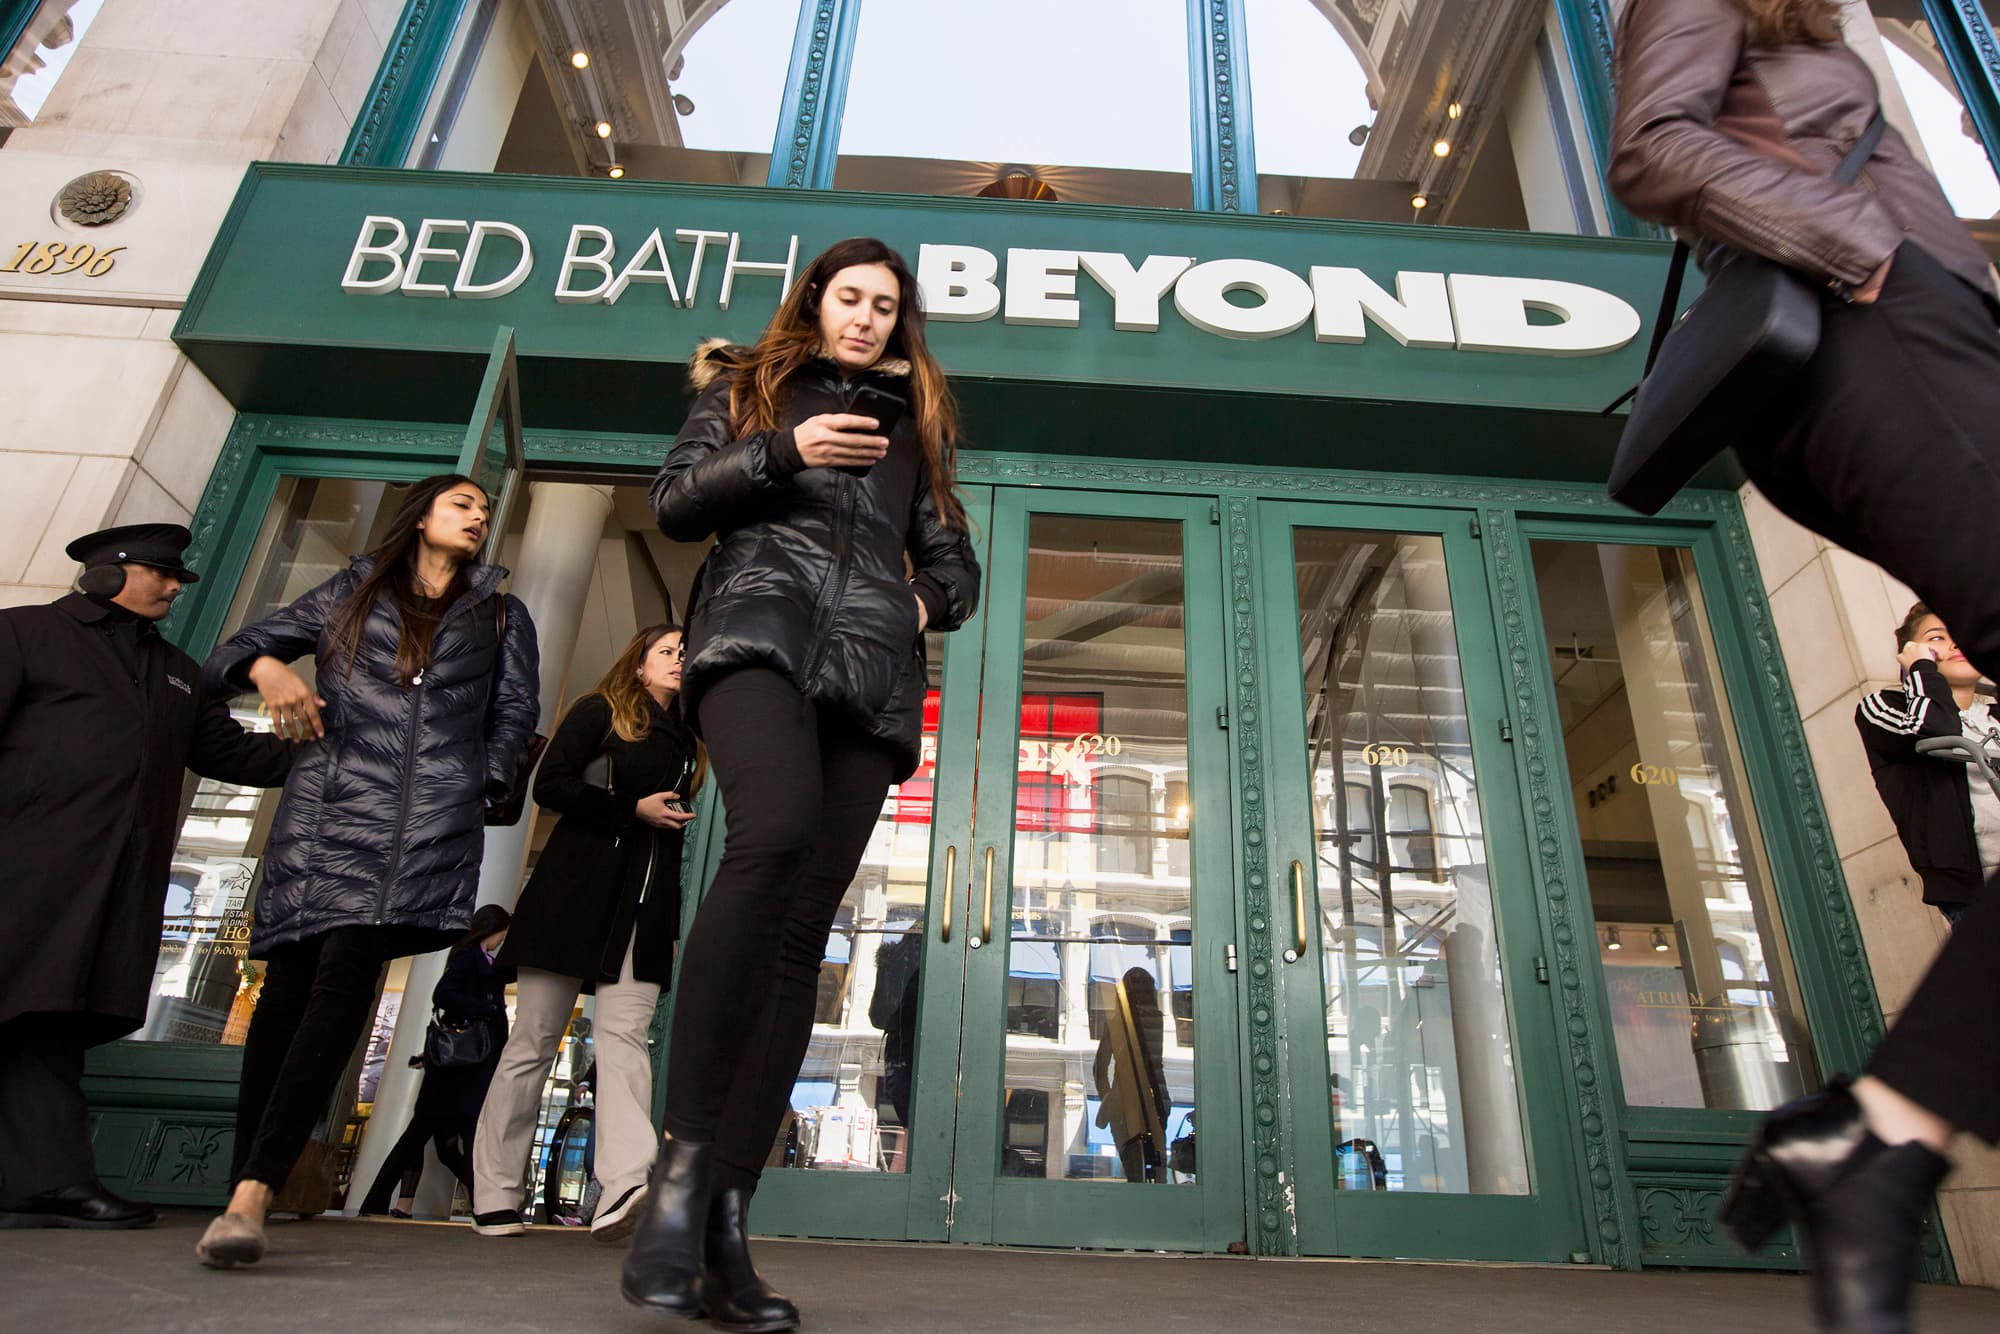 Bed Bath & Beyond shares soar more than 80% in after-hours trading